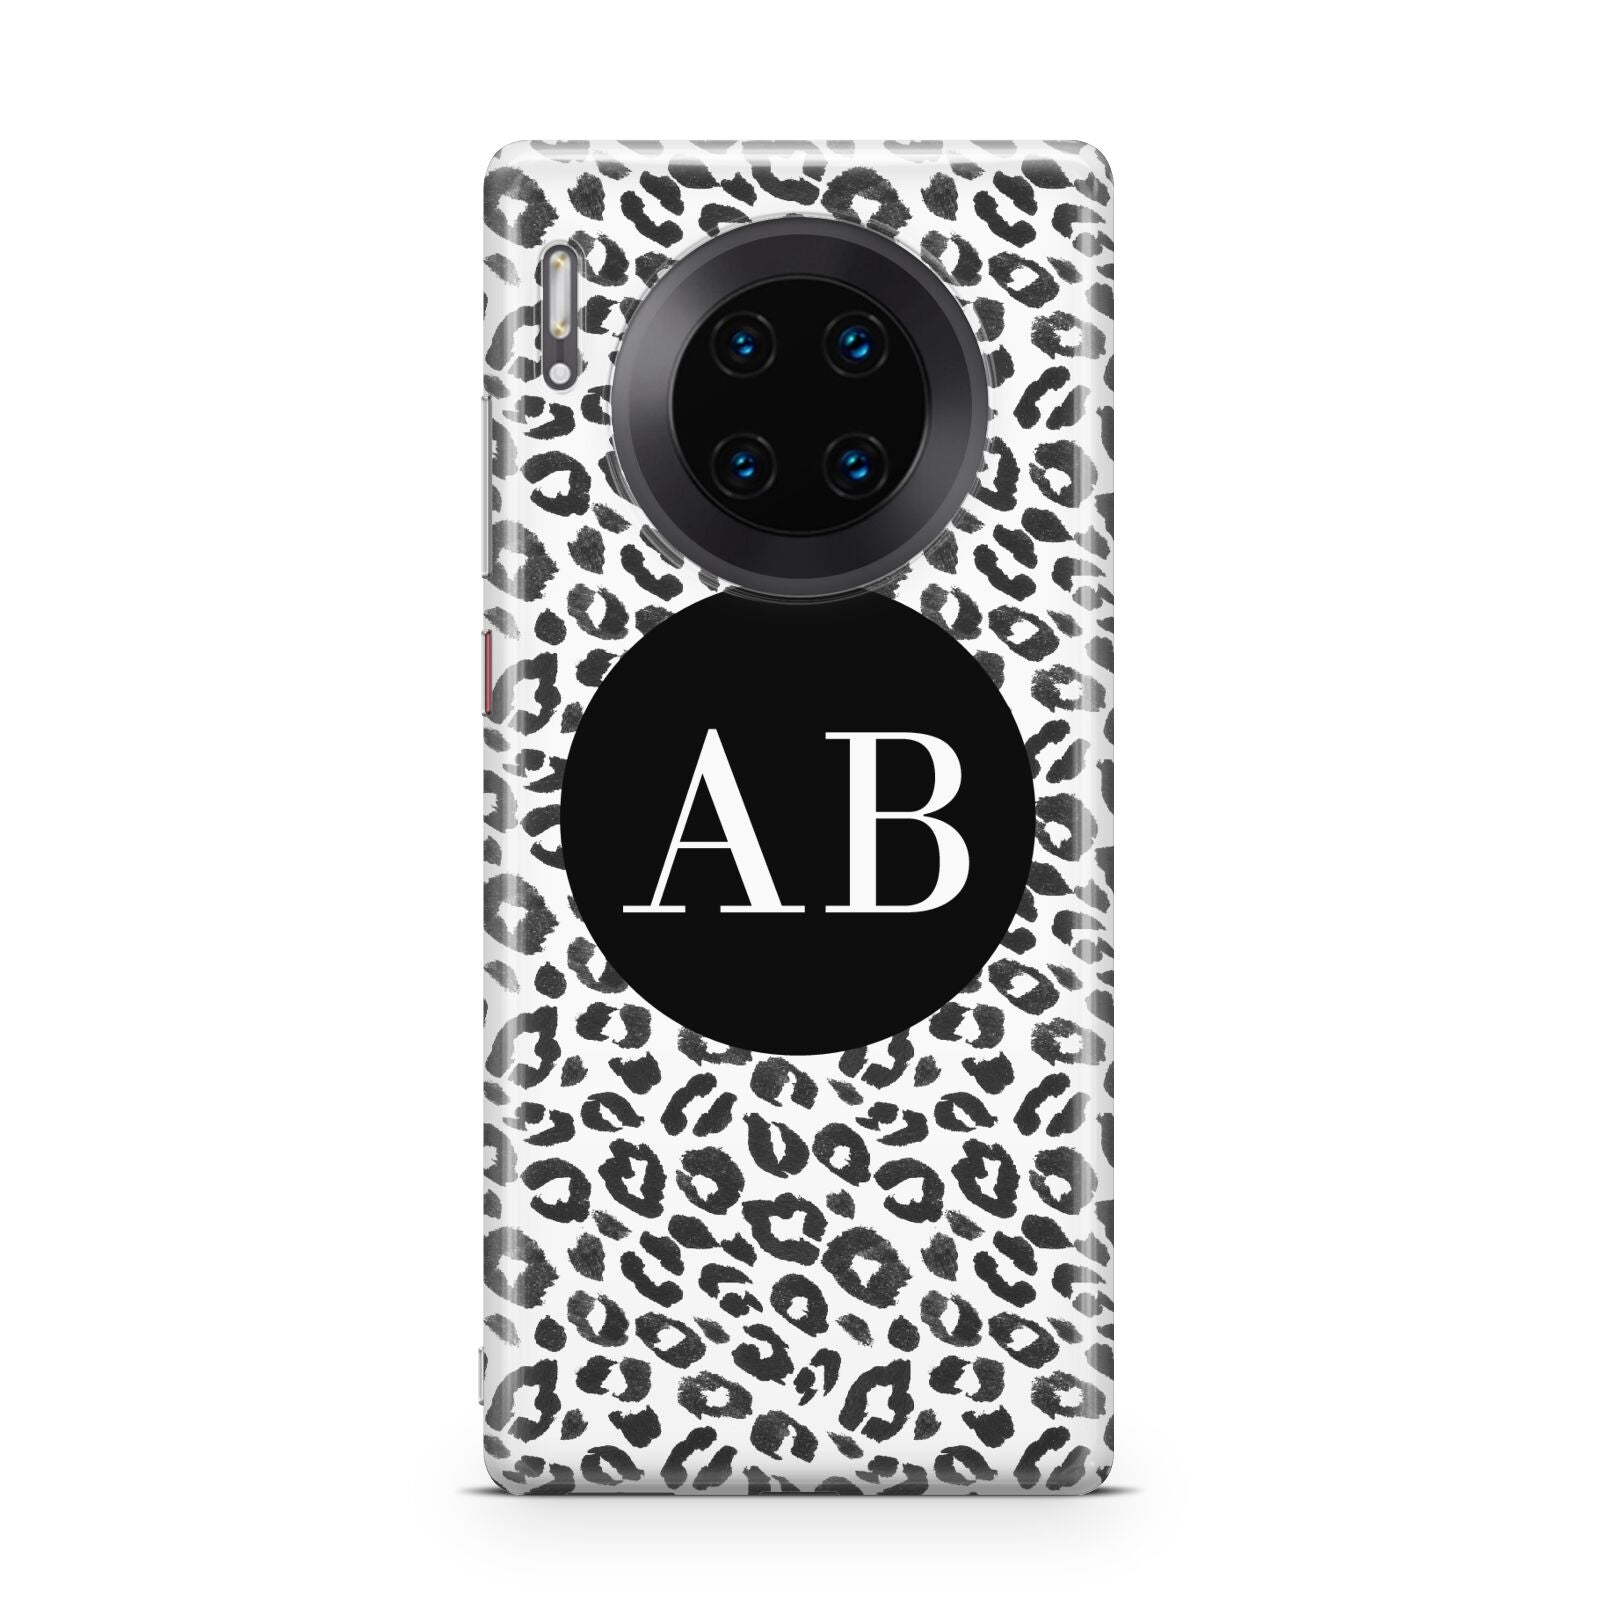 Leopard Print Black and White Huawei Mate 30 Pro Phone Case